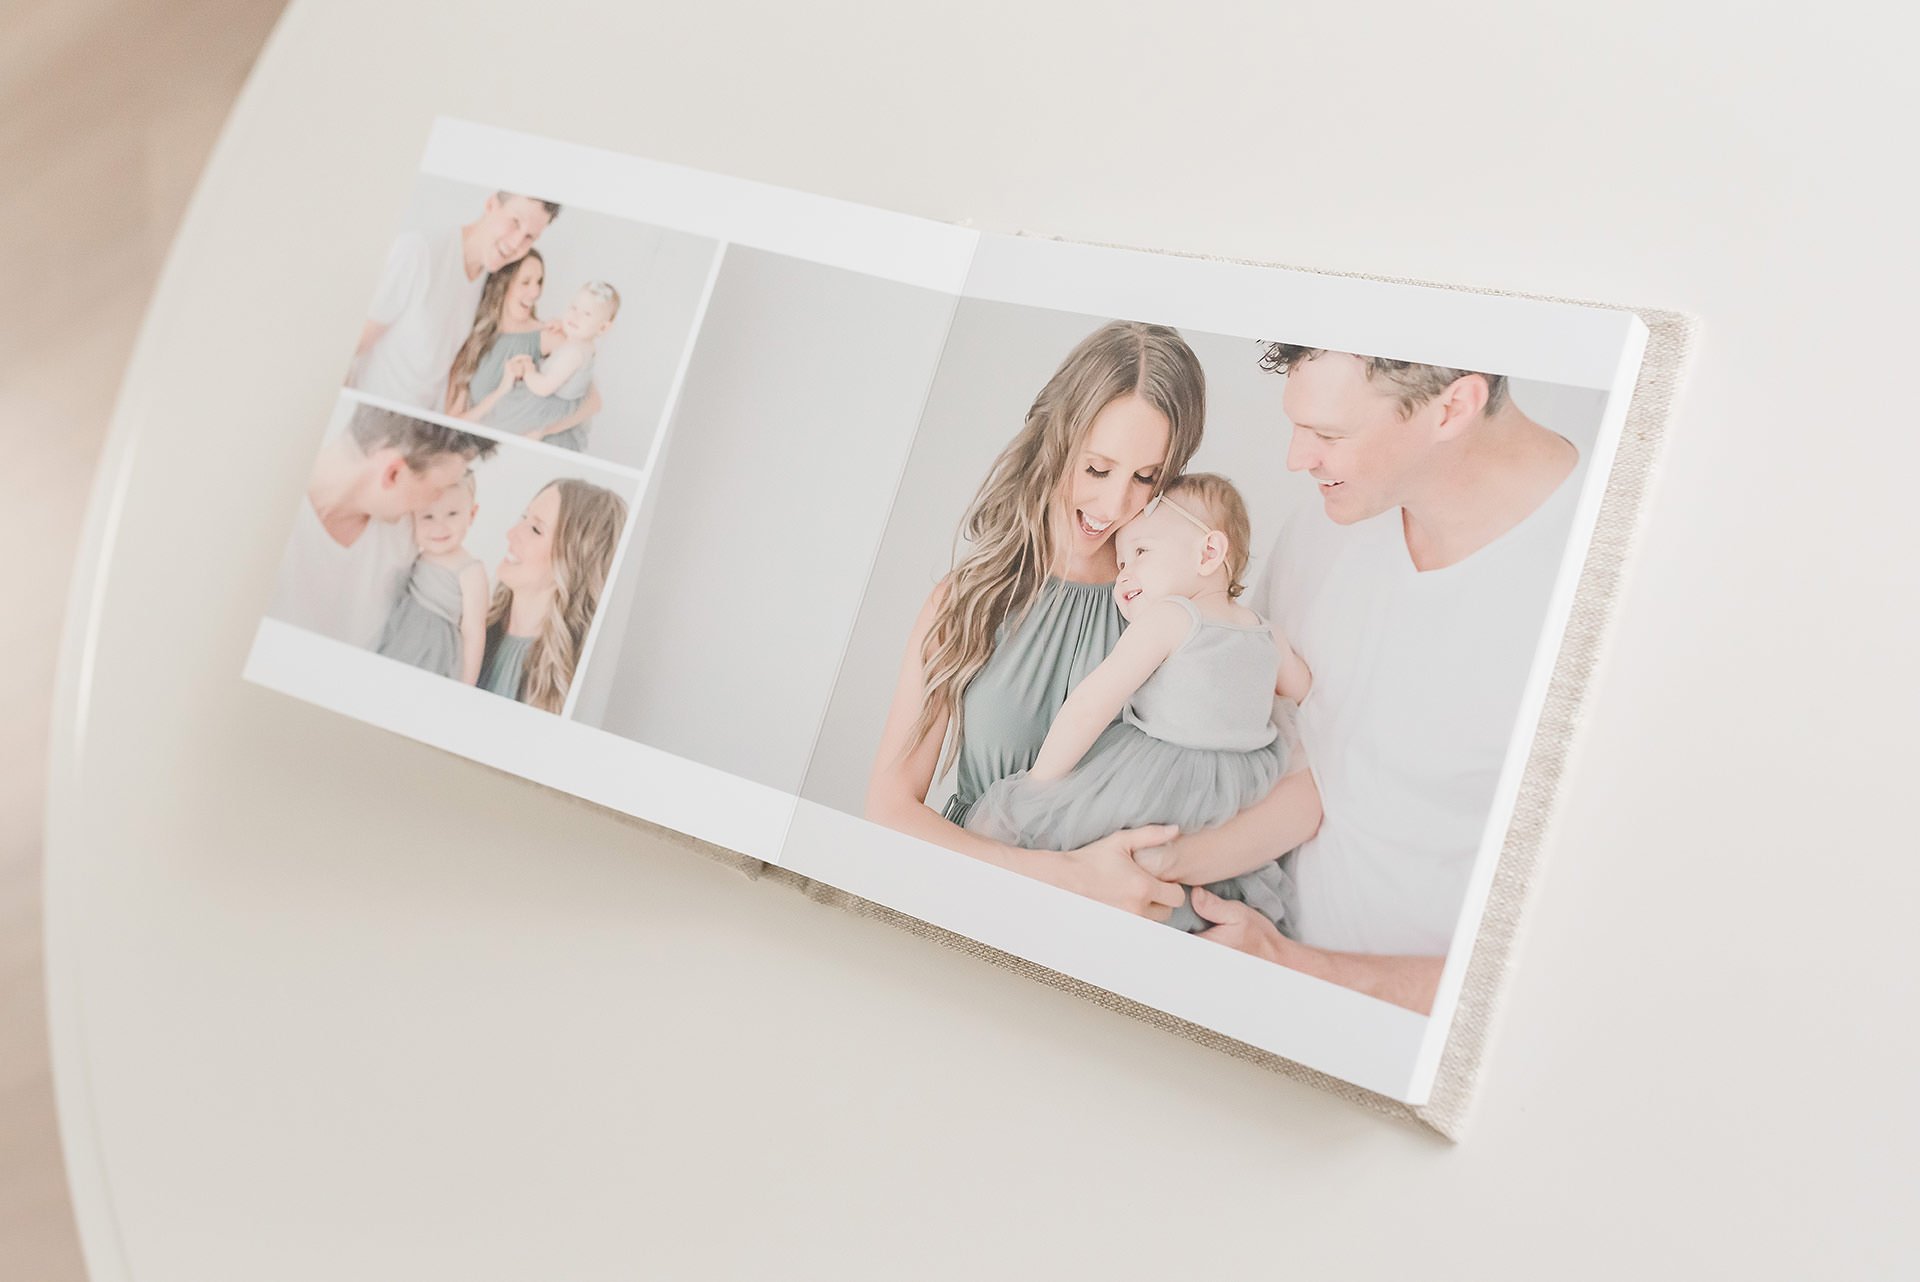 album-preview-custom-made-photography-prints-family-photographer-turn-memories-into-gifts.jpg